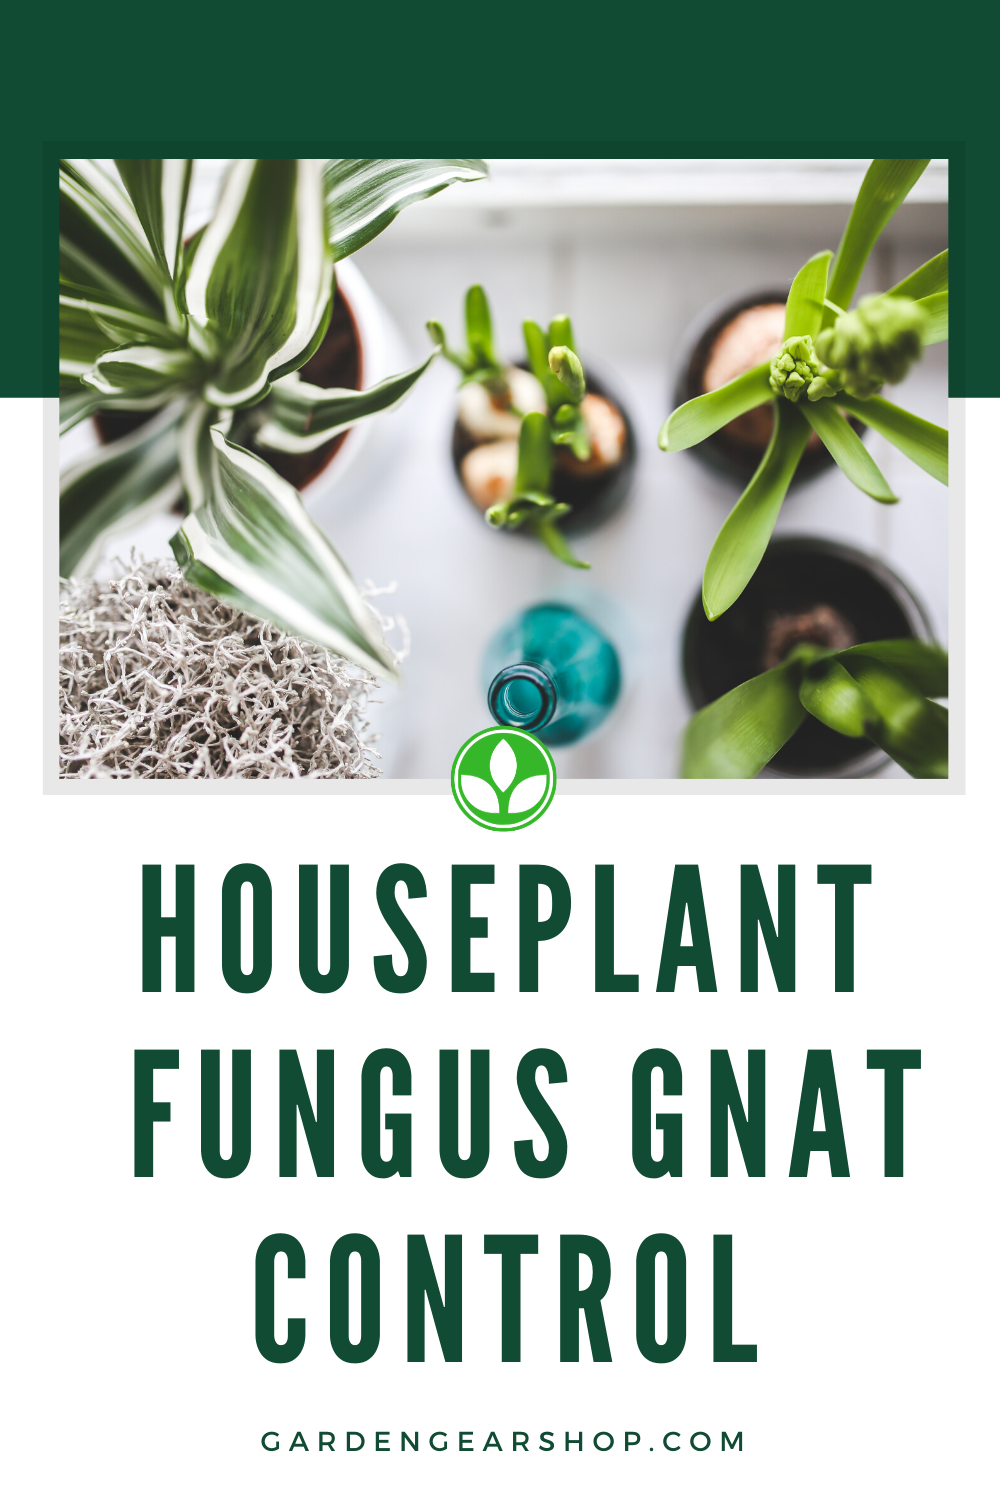 How To Get Rid of Fungus Gnats in Houseplant